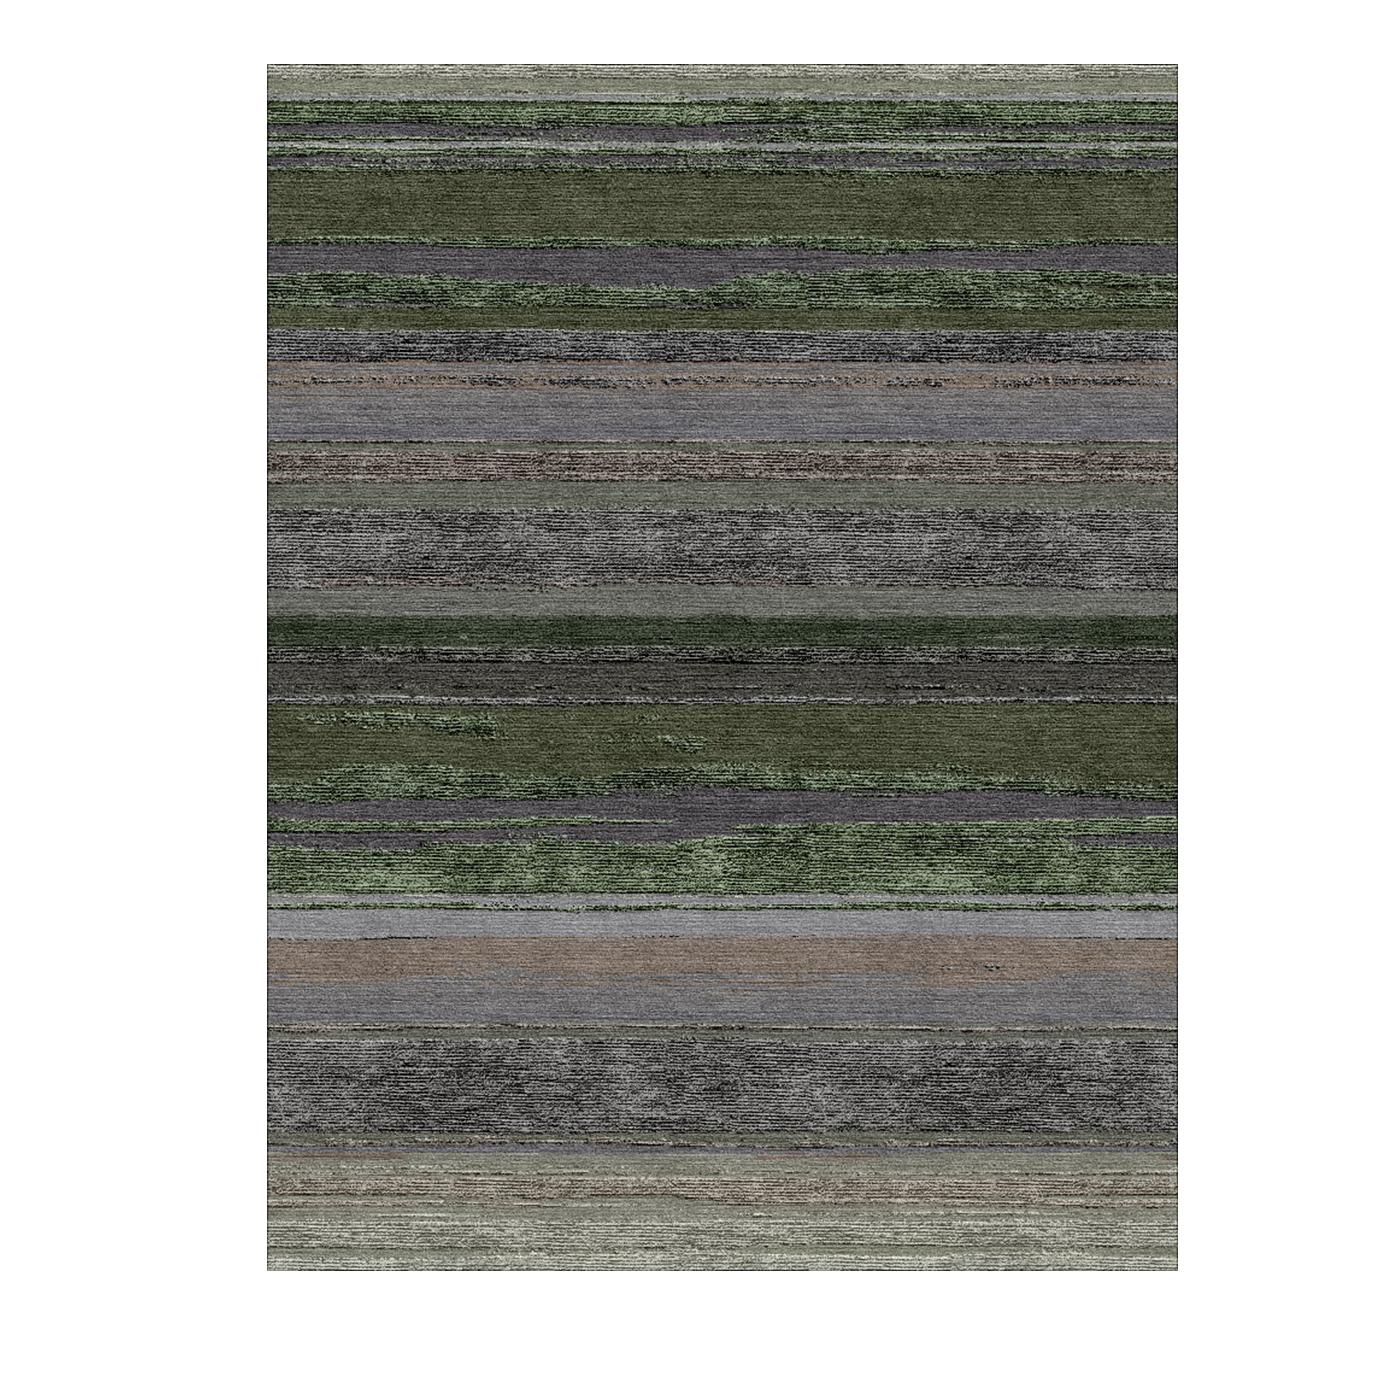 A creative expression of simple forms and color, this exquisite rug is a sublime accent to any entryway, bedroom, or study decor. Handmade in India with Tibetan knotting technique, this piece combines local dyes with wool and bamboo fibers, layering